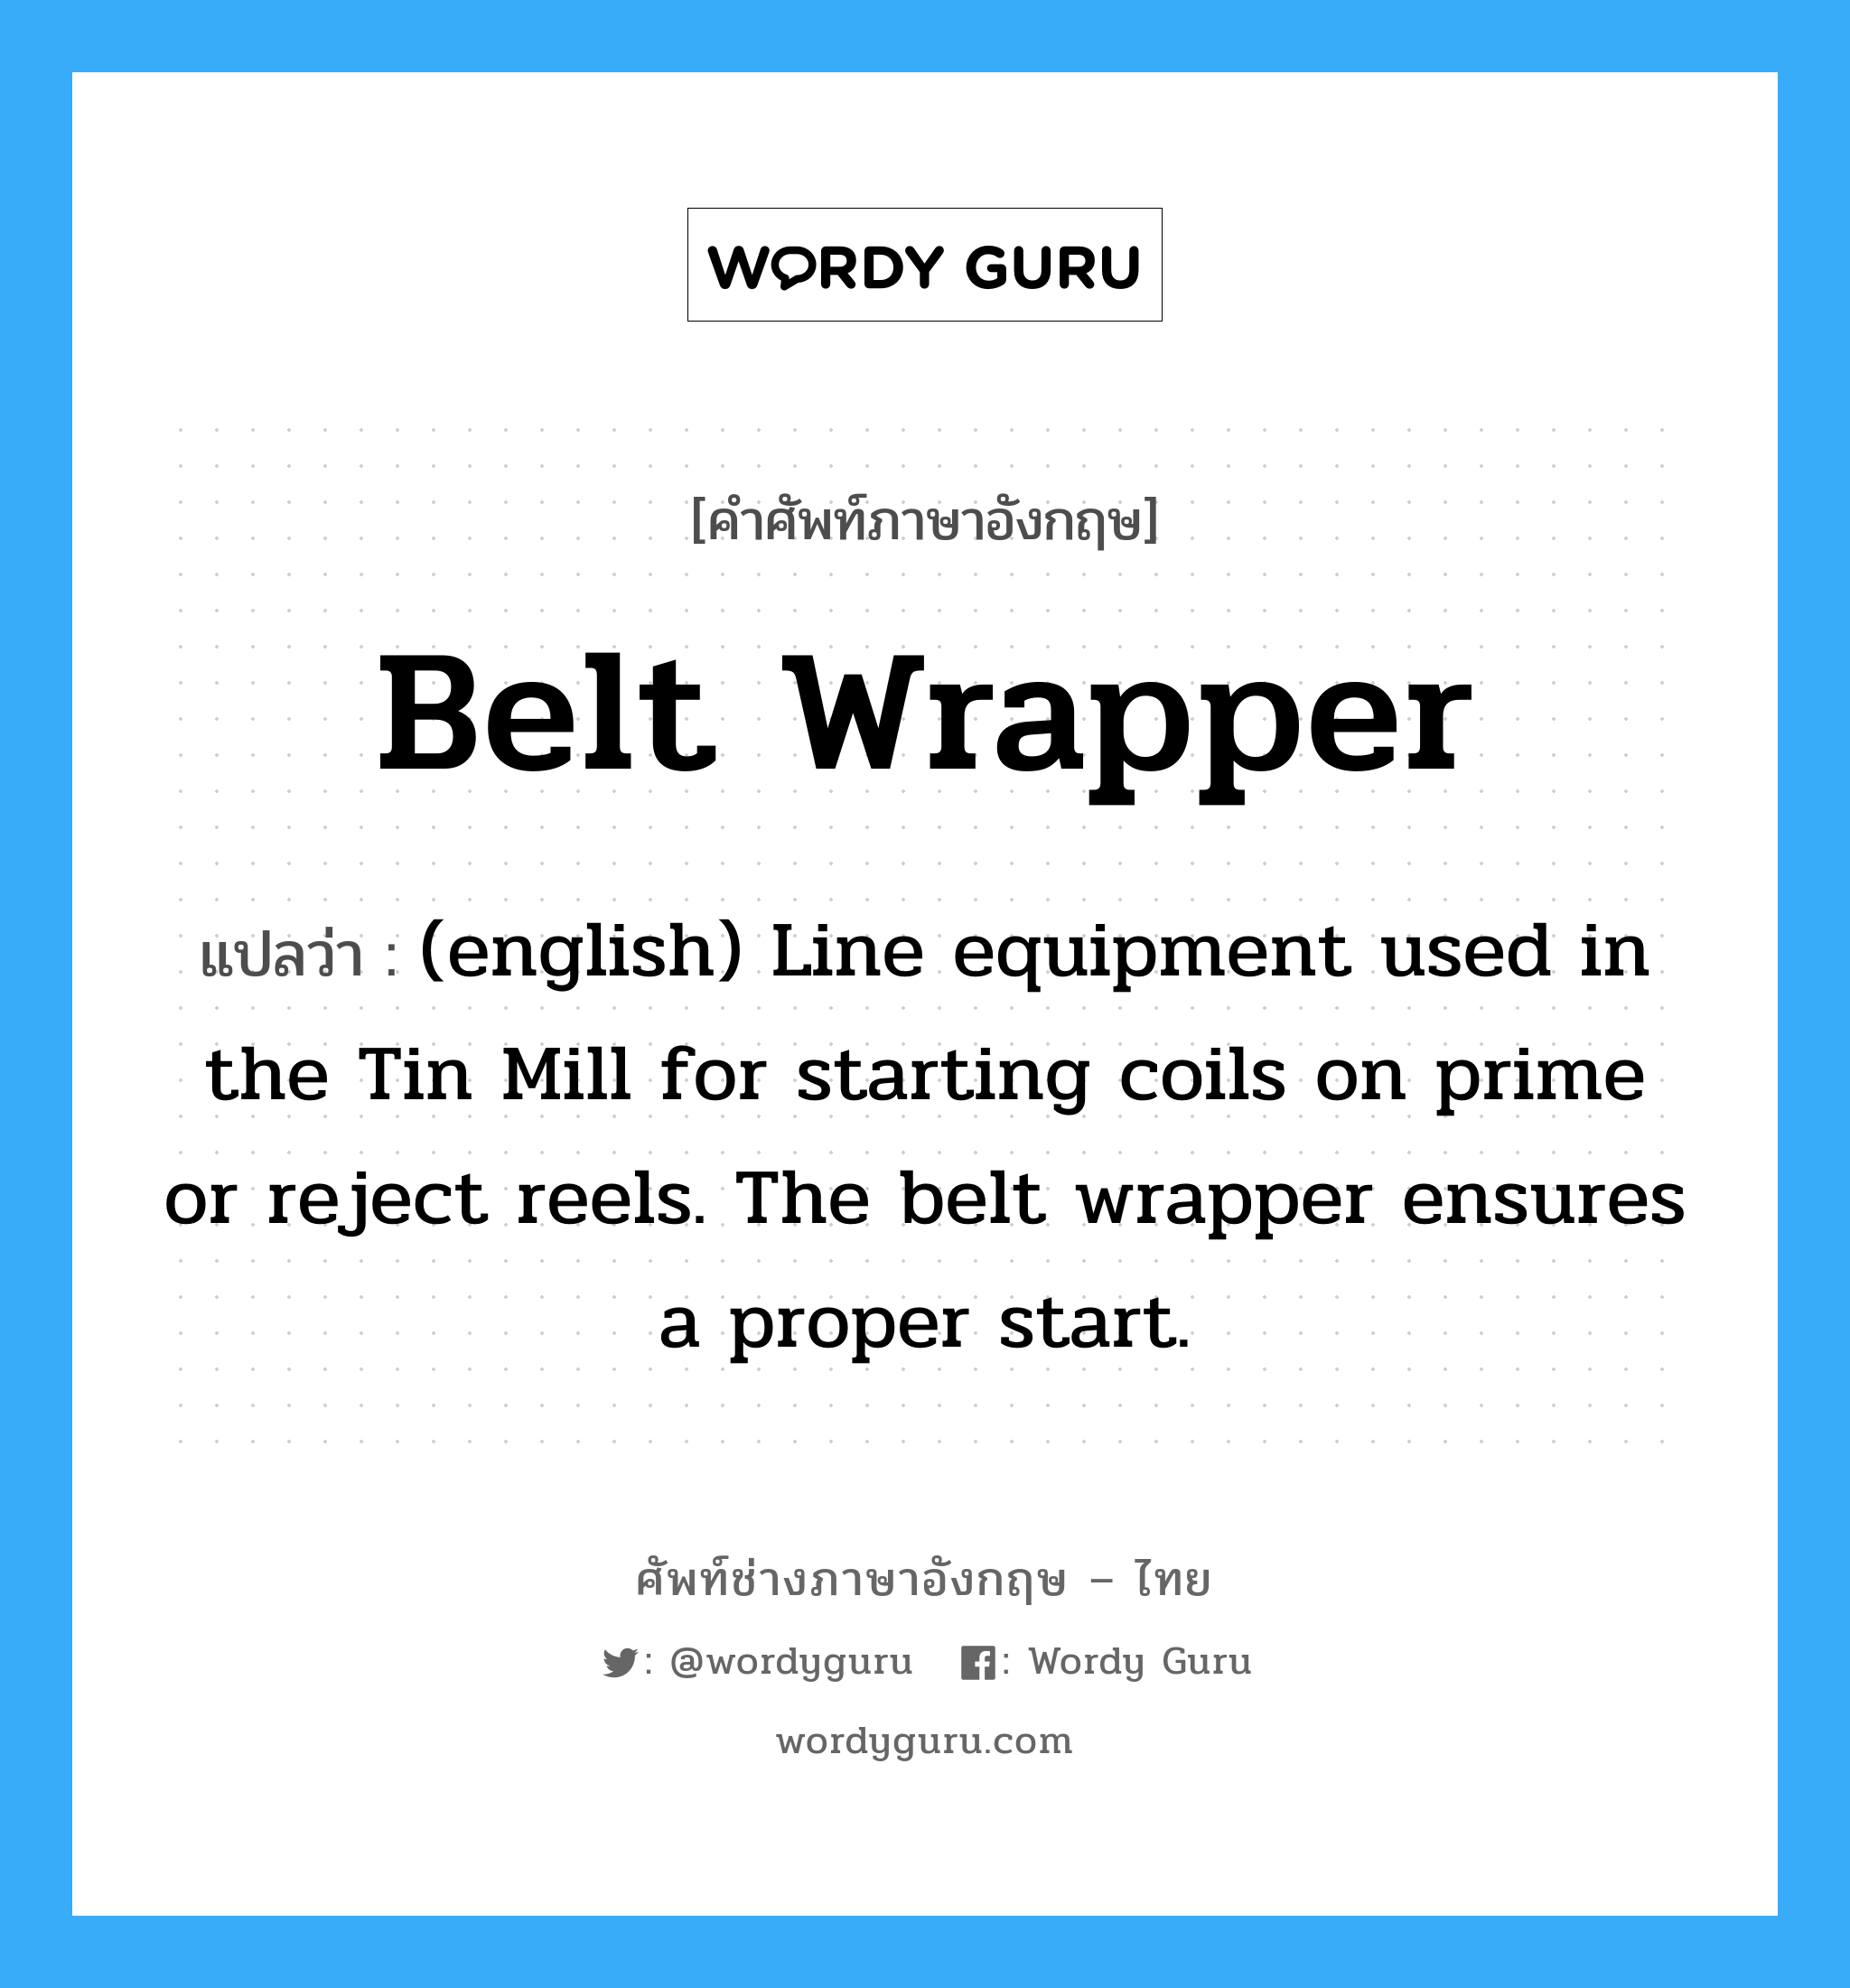 (english) Line equipment used in the Tin Mill for starting coils on prime or reject reels. The belt wrapper ensures a proper start. ภาษาอังกฤษ?, คำศัพท์ช่างภาษาอังกฤษ - ไทย (english) Line equipment used in the Tin Mill for starting coils on prime or reject reels. The belt wrapper ensures a proper start. คำศัพท์ภาษาอังกฤษ (english) Line equipment used in the Tin Mill for starting coils on prime or reject reels. The belt wrapper ensures a proper start. แปลว่า Belt Wrapper